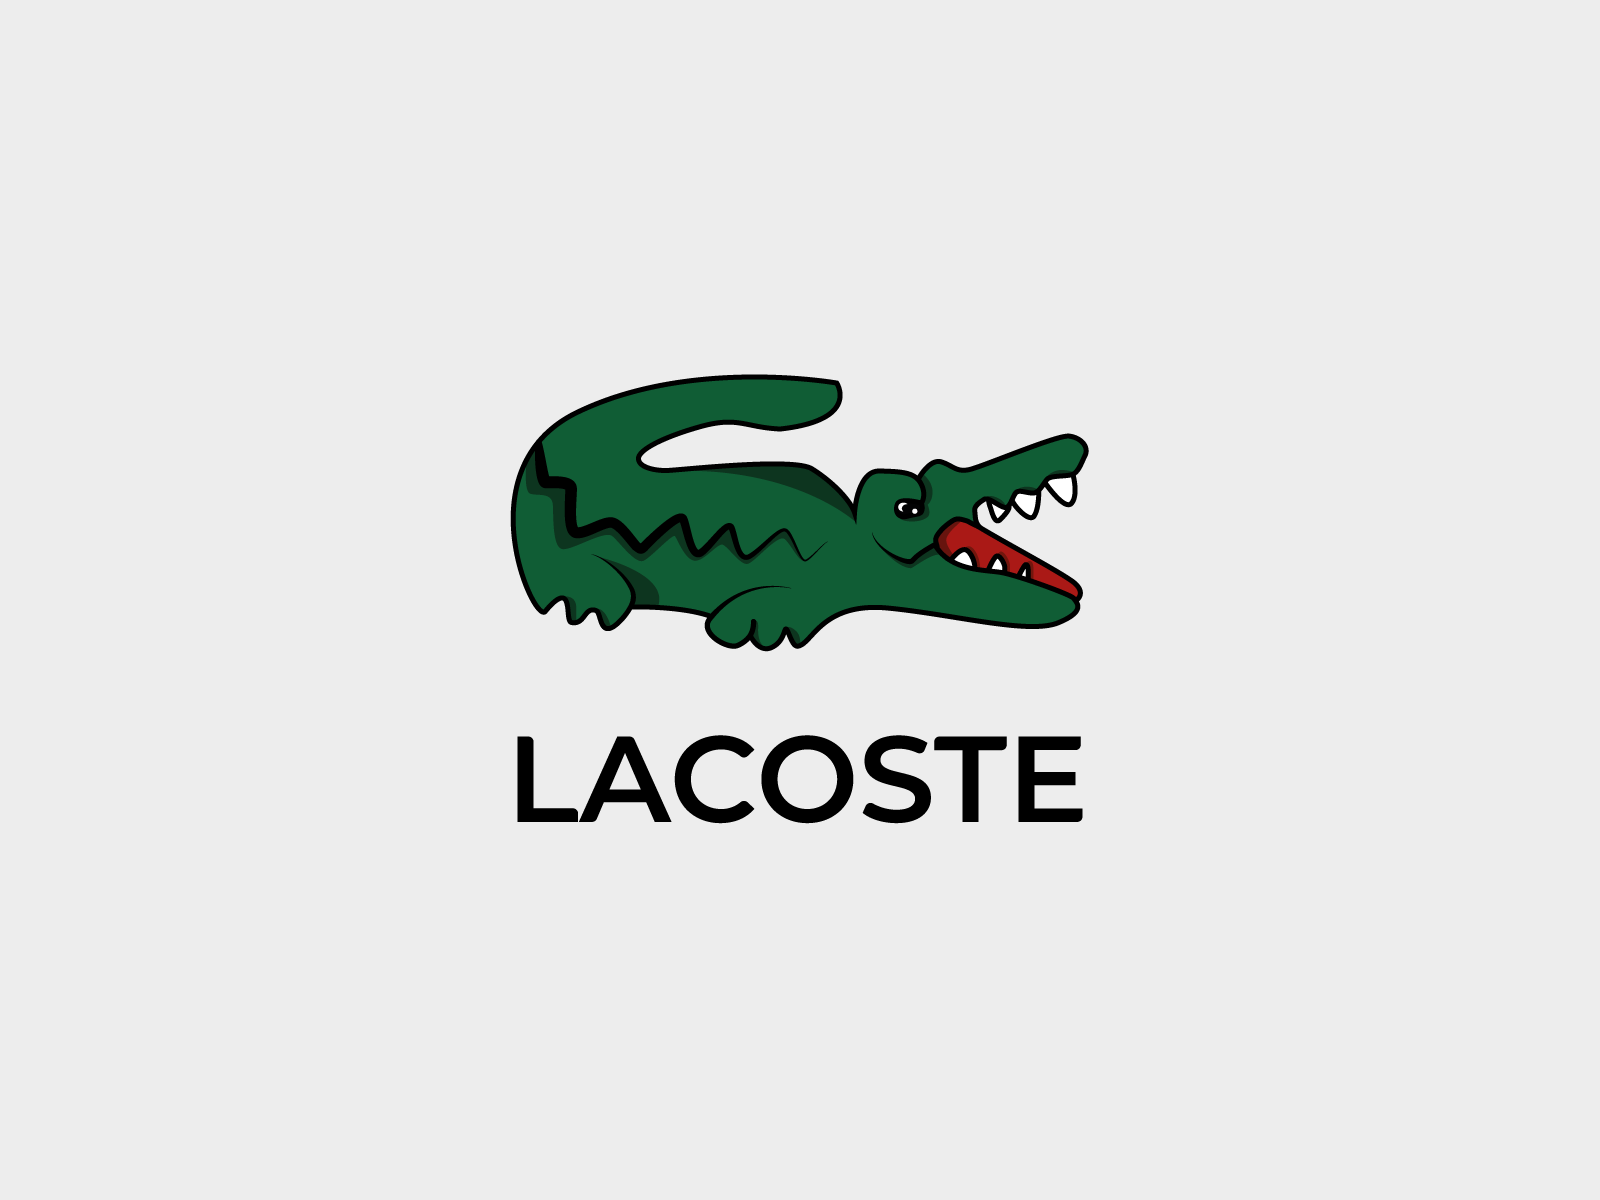 Redesign logo LACOSTE by Eric Le Carer on Dribbble